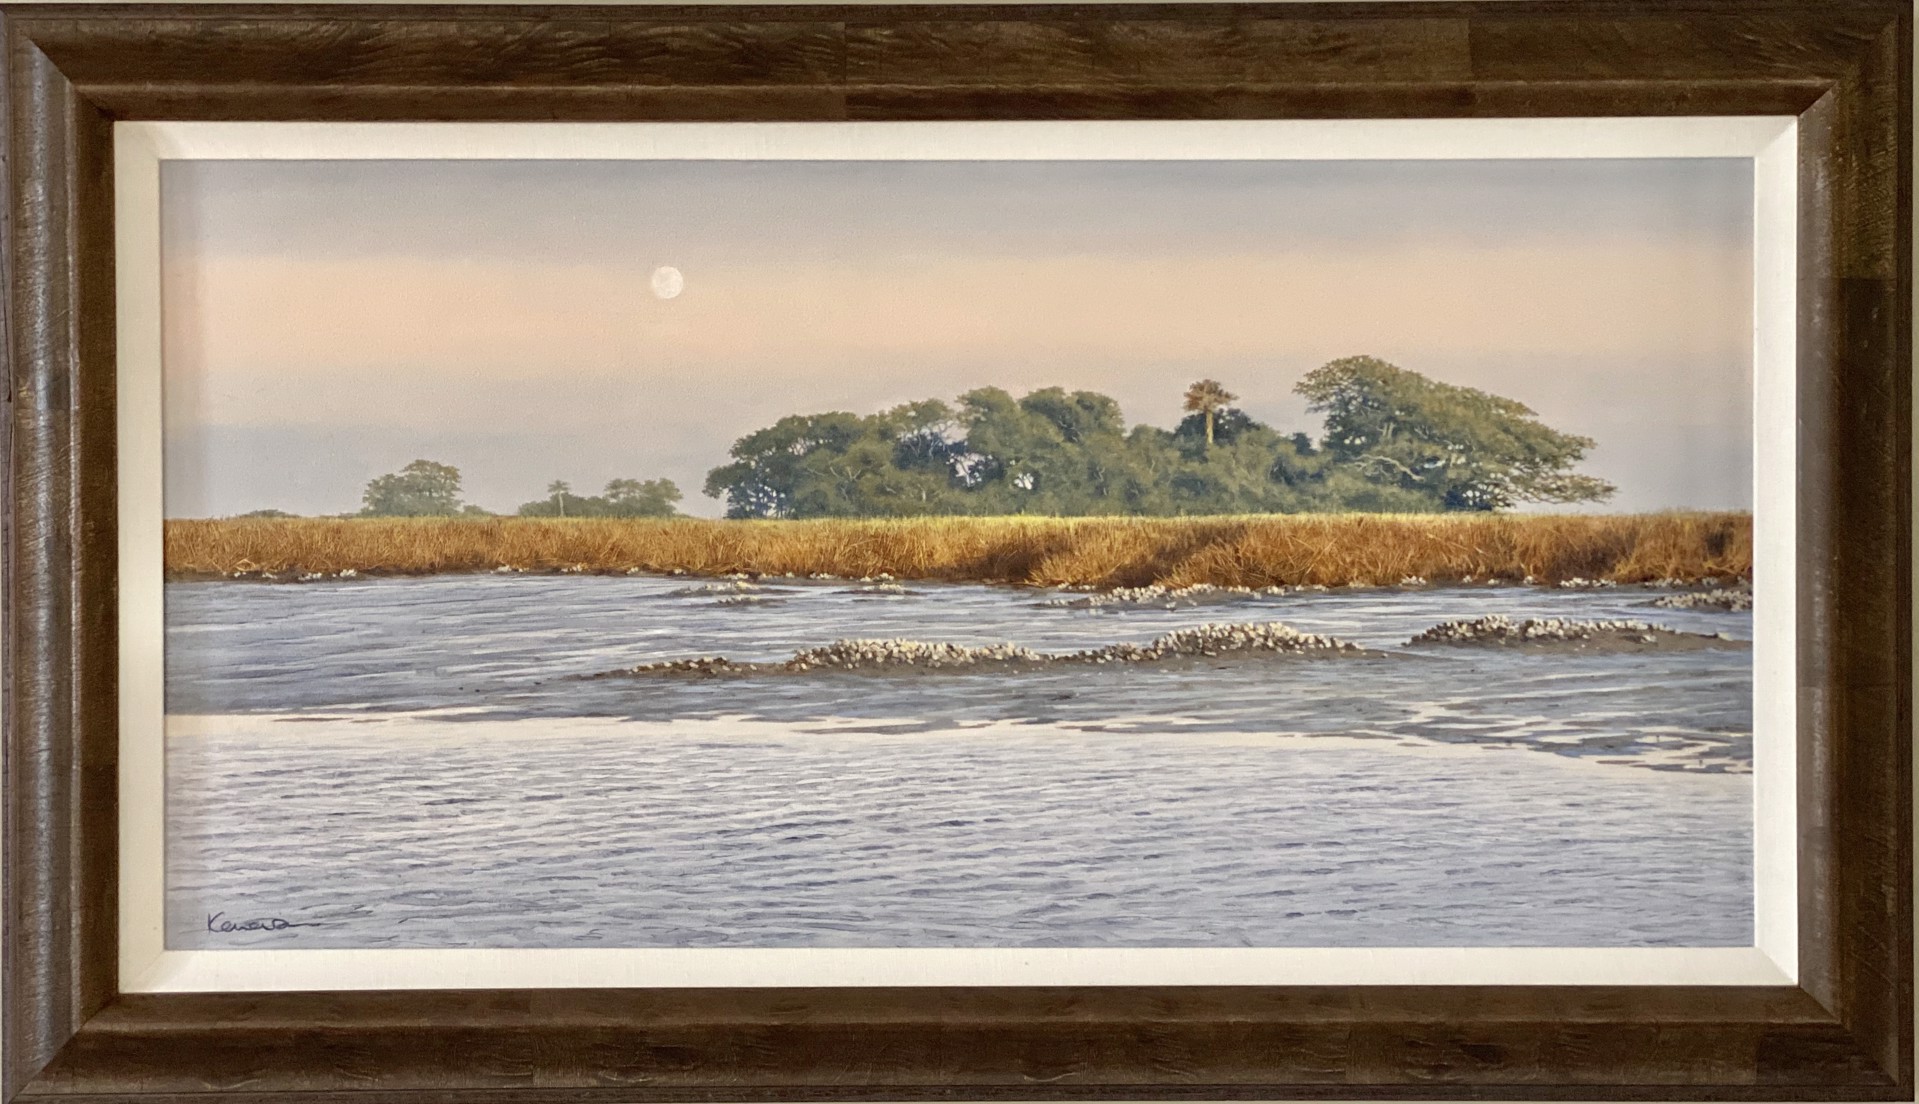 The Moon is in the Marshes by Simon Kenevan